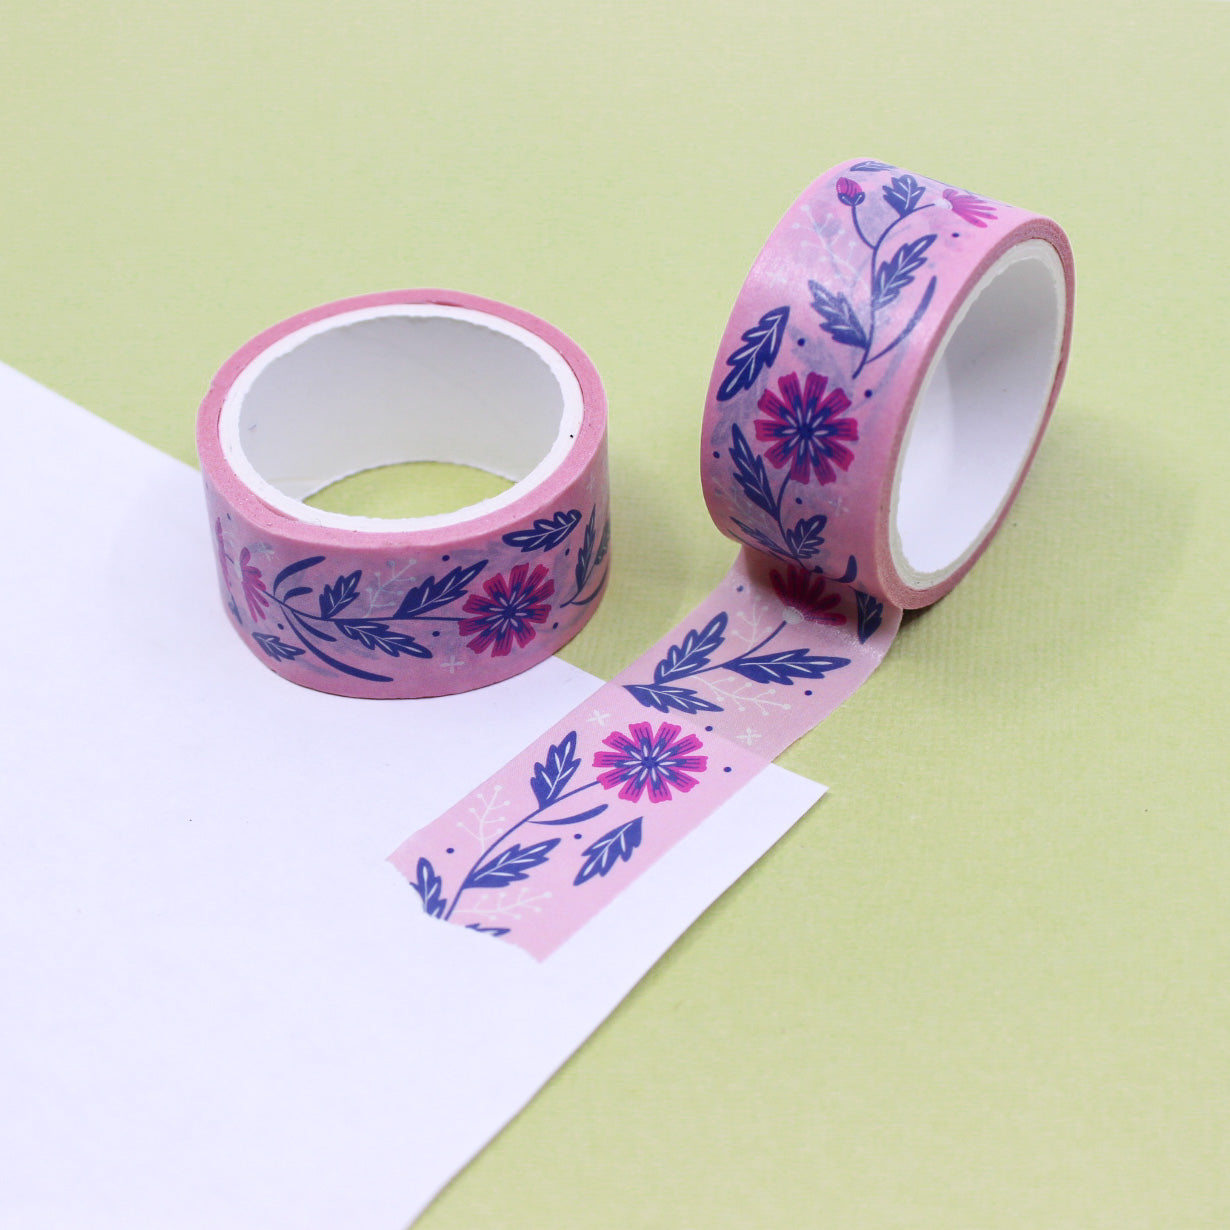 Enhance your crafts with our Pink & Blue Floral Washi Tape, featuring a delicate floral pattern in a lovely blend of pink and blue hues. Ideal for adding a touch of floral elegance to your projects. This tape is sold at BBB Supplies Craft Shop.